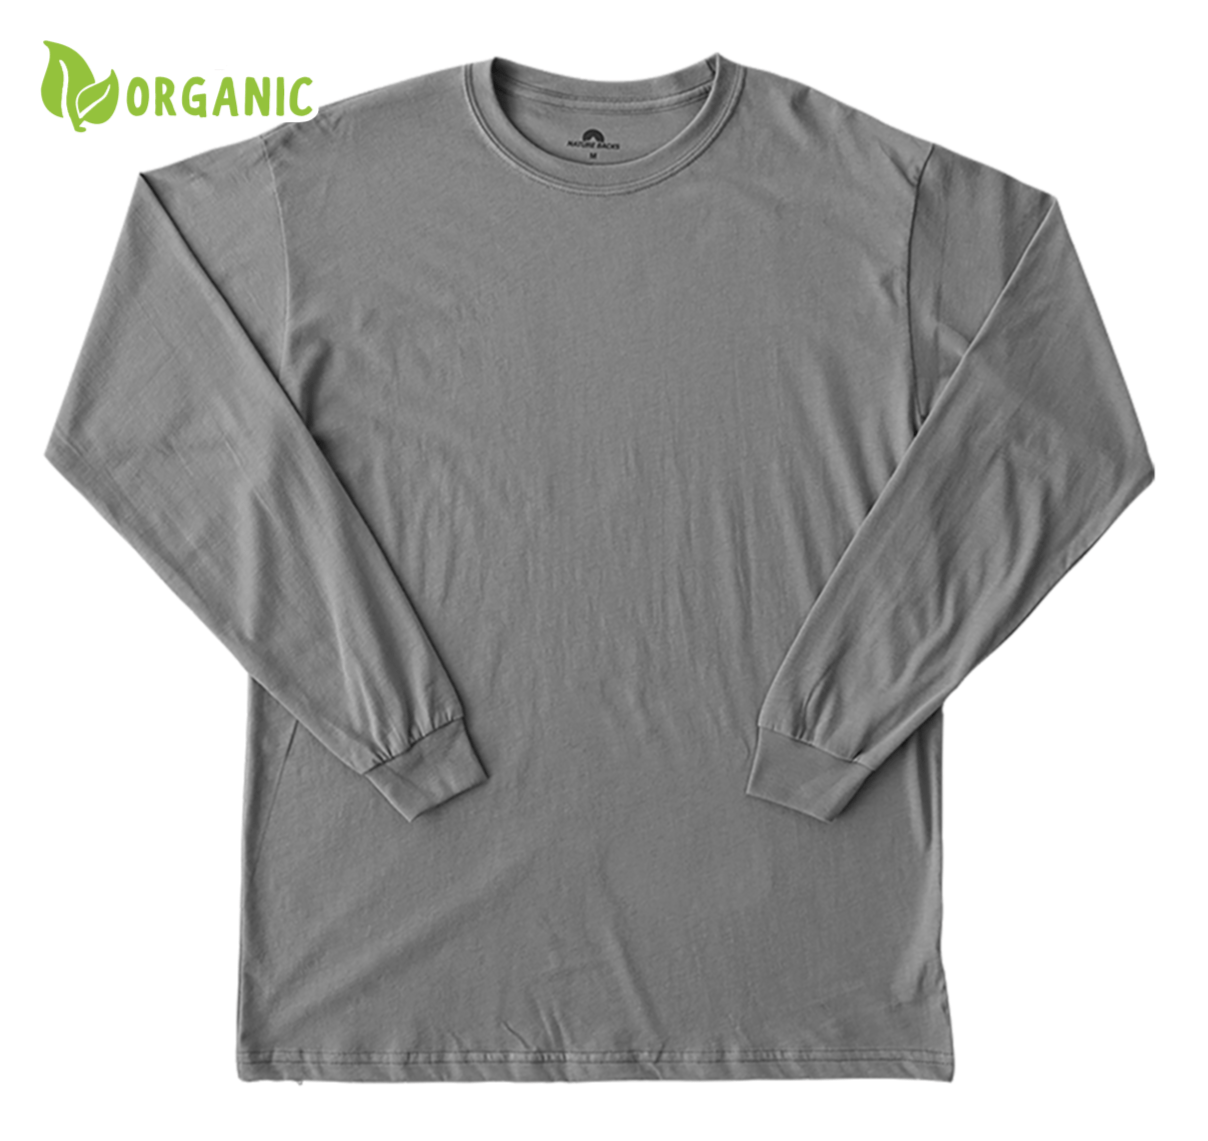 Nature Backs Long Sleeve 100% Organic Cotton T-Shirt | Minimalist Slate Long Sleeve made with Eco-Friendly Fibers Sustainably made in the USA 